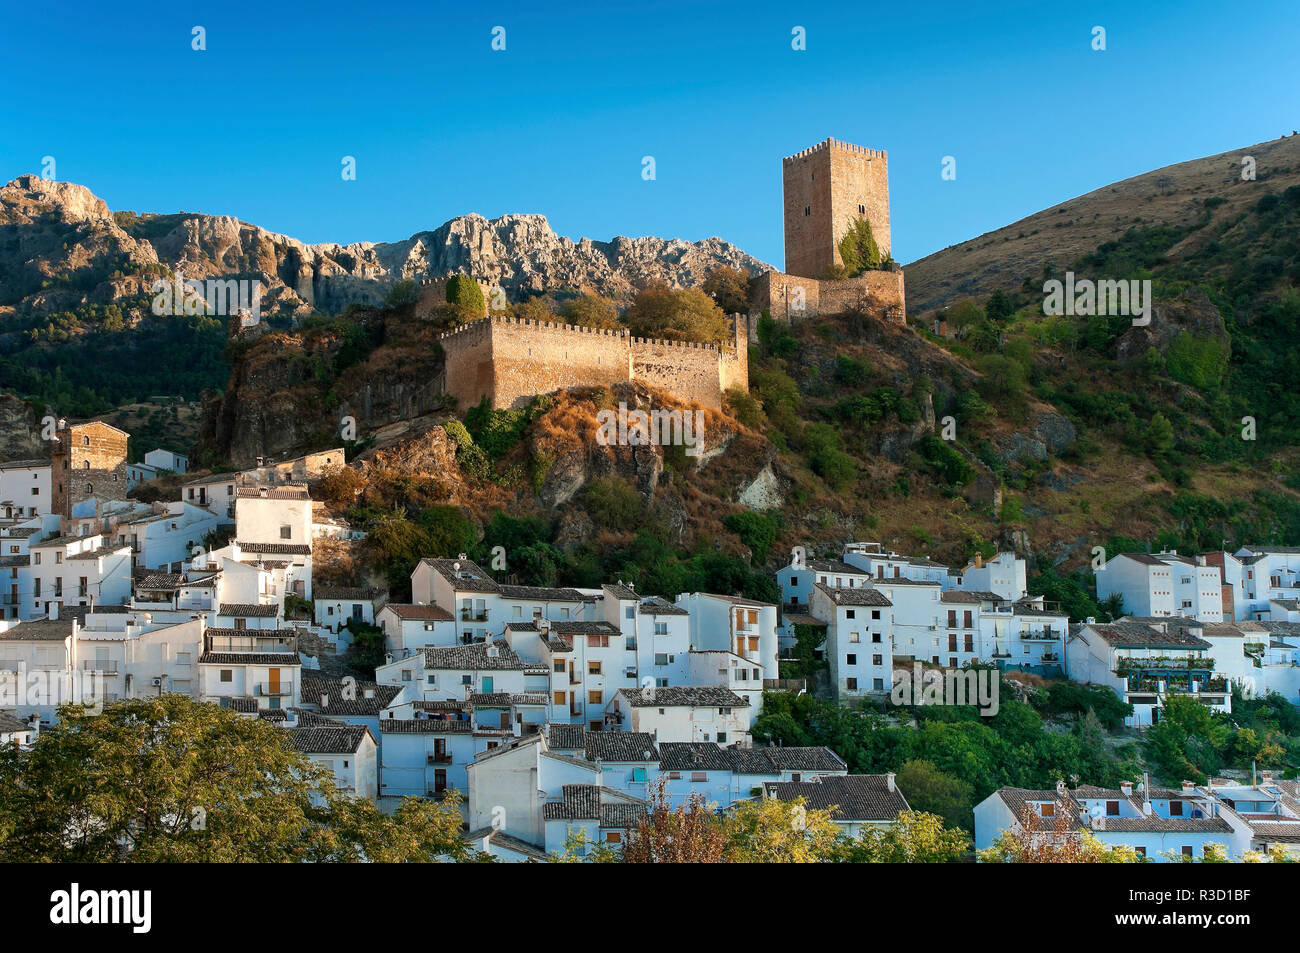 Panoramic view with the Yedra Castle (11th century). Cazorla. Jaen province. Region of Andalusia. Spain. Europe Stock Photo